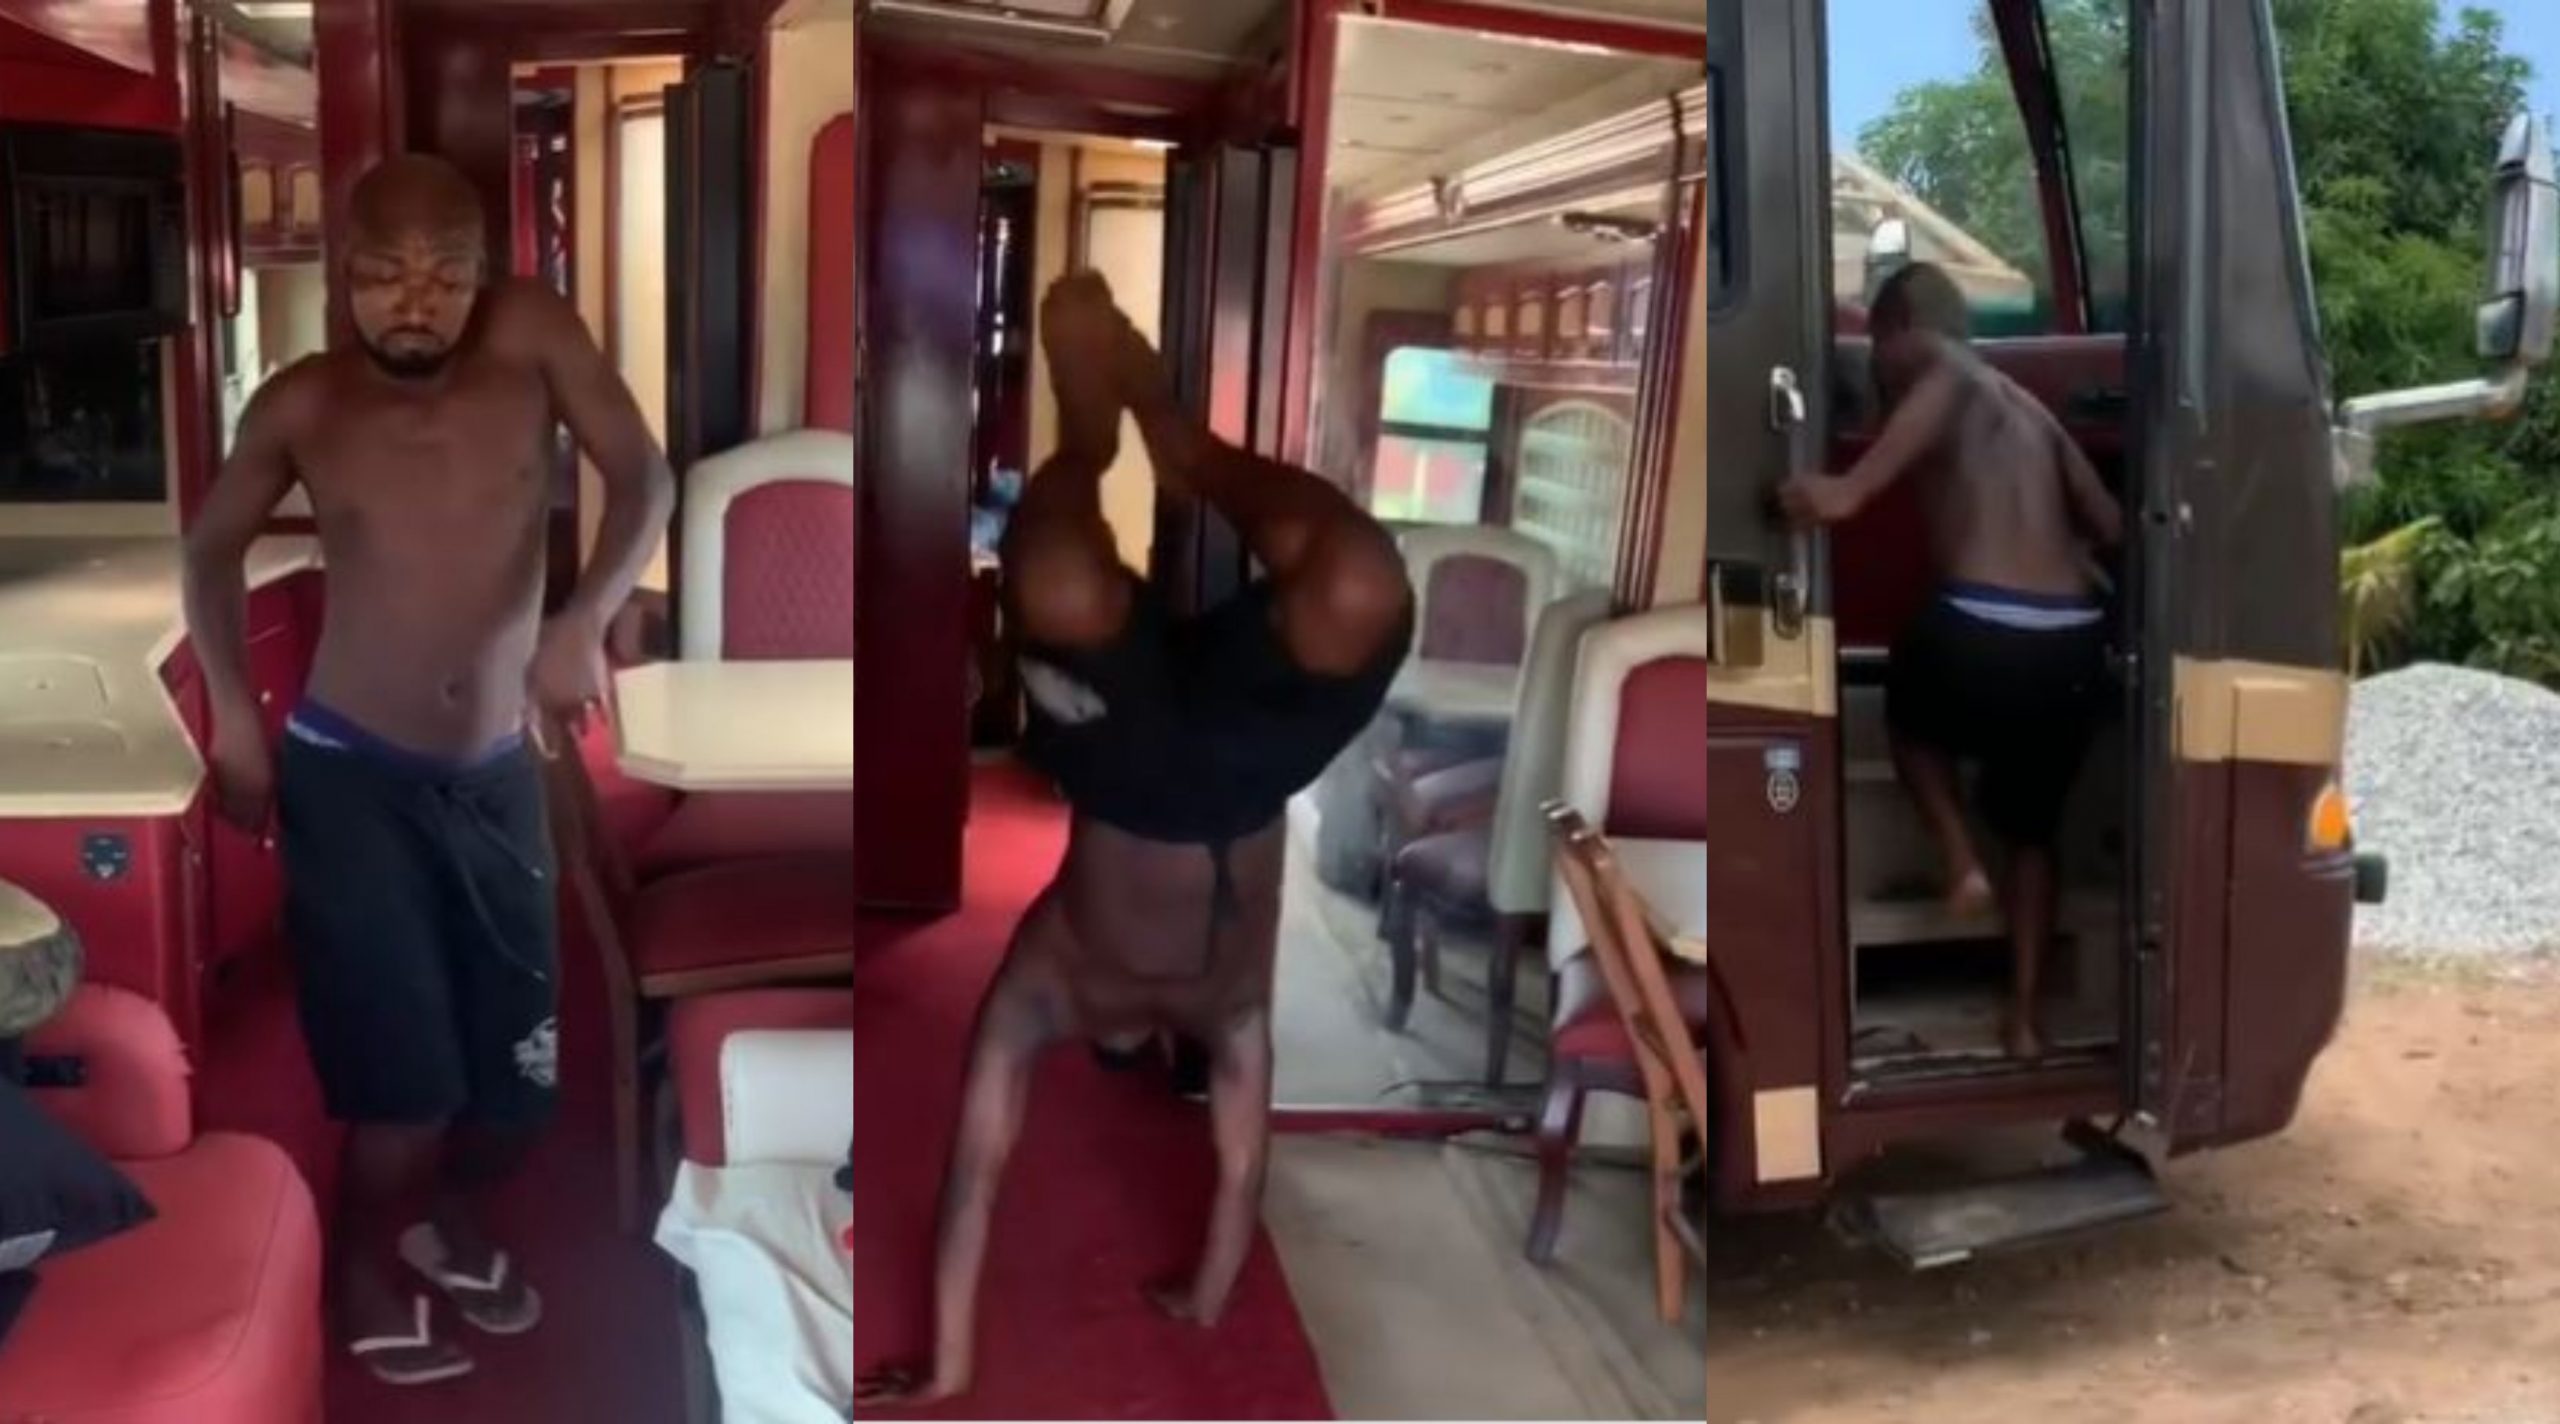 Funny Face acquires luxury tour bus, gives tour of the inside